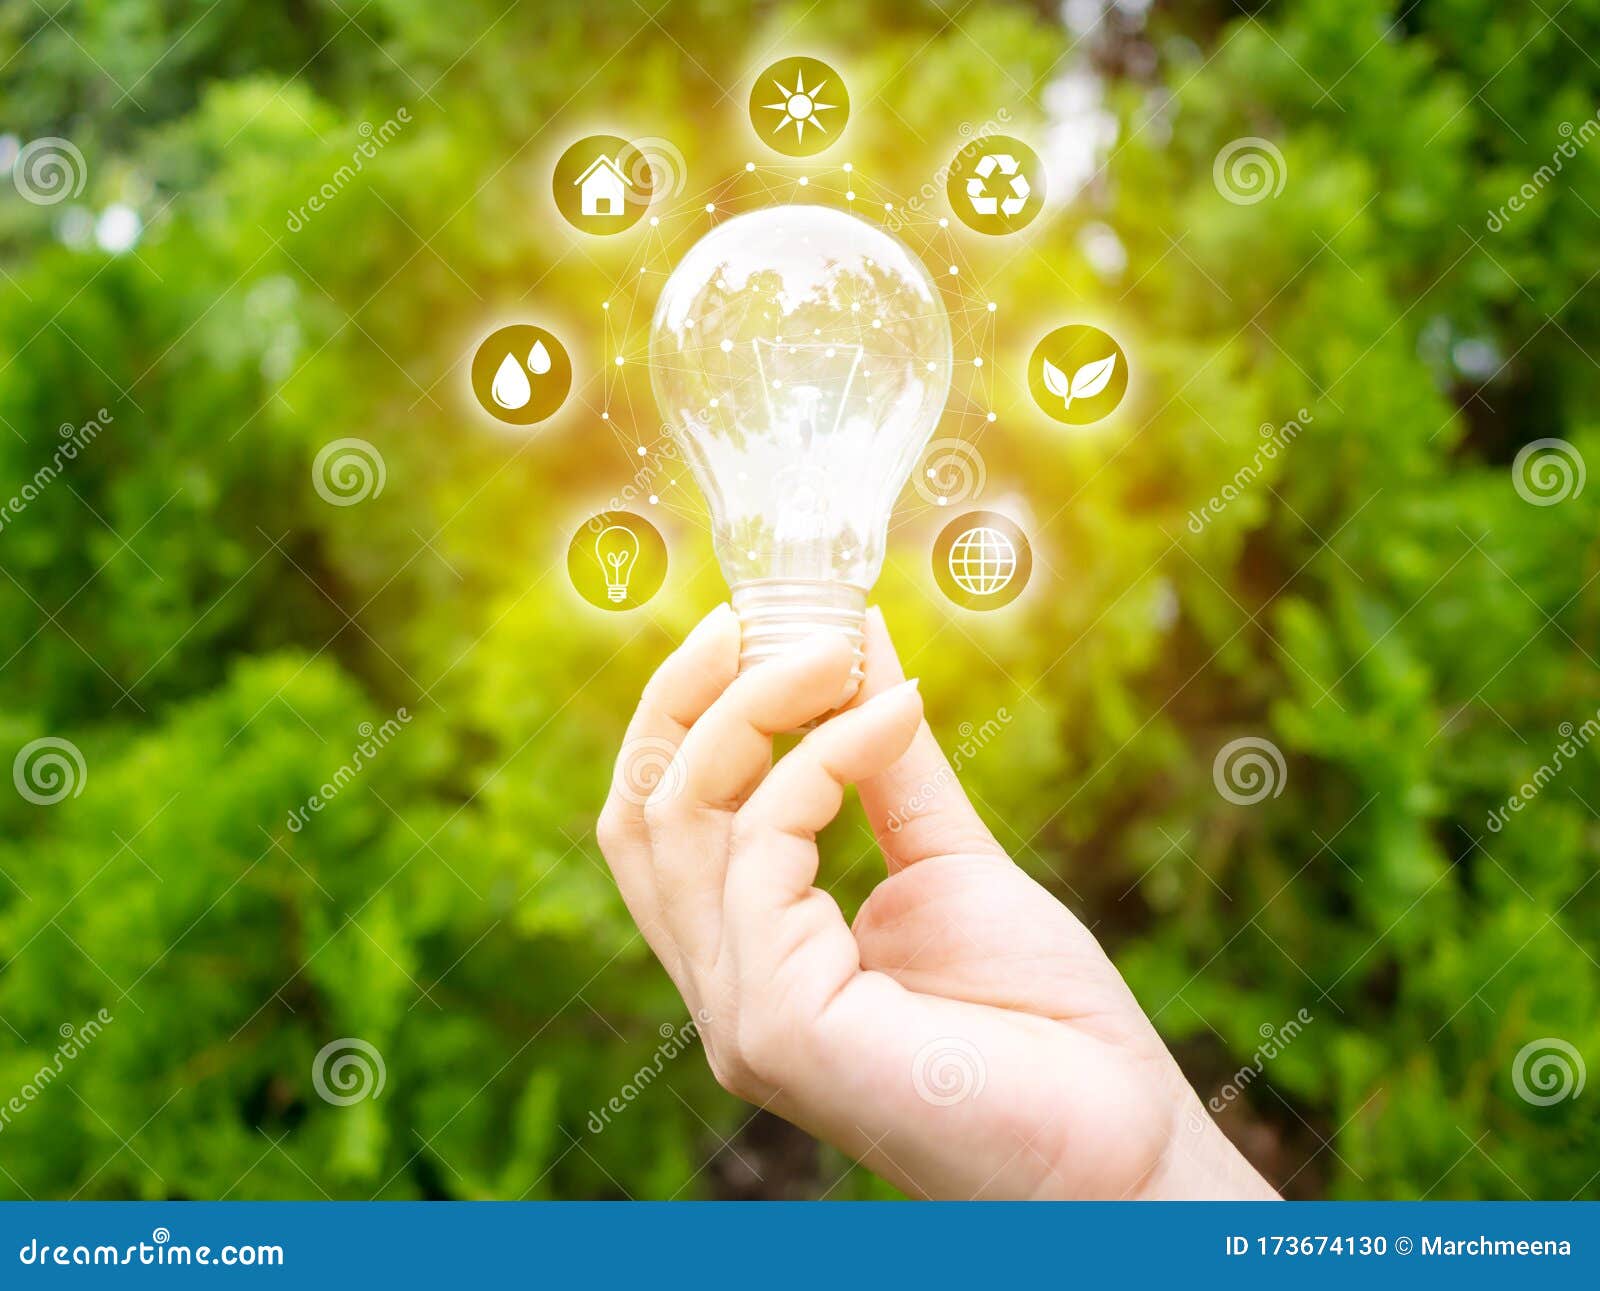 concept save energy efficiency. hand holding light bulb with icon on blurred tree background